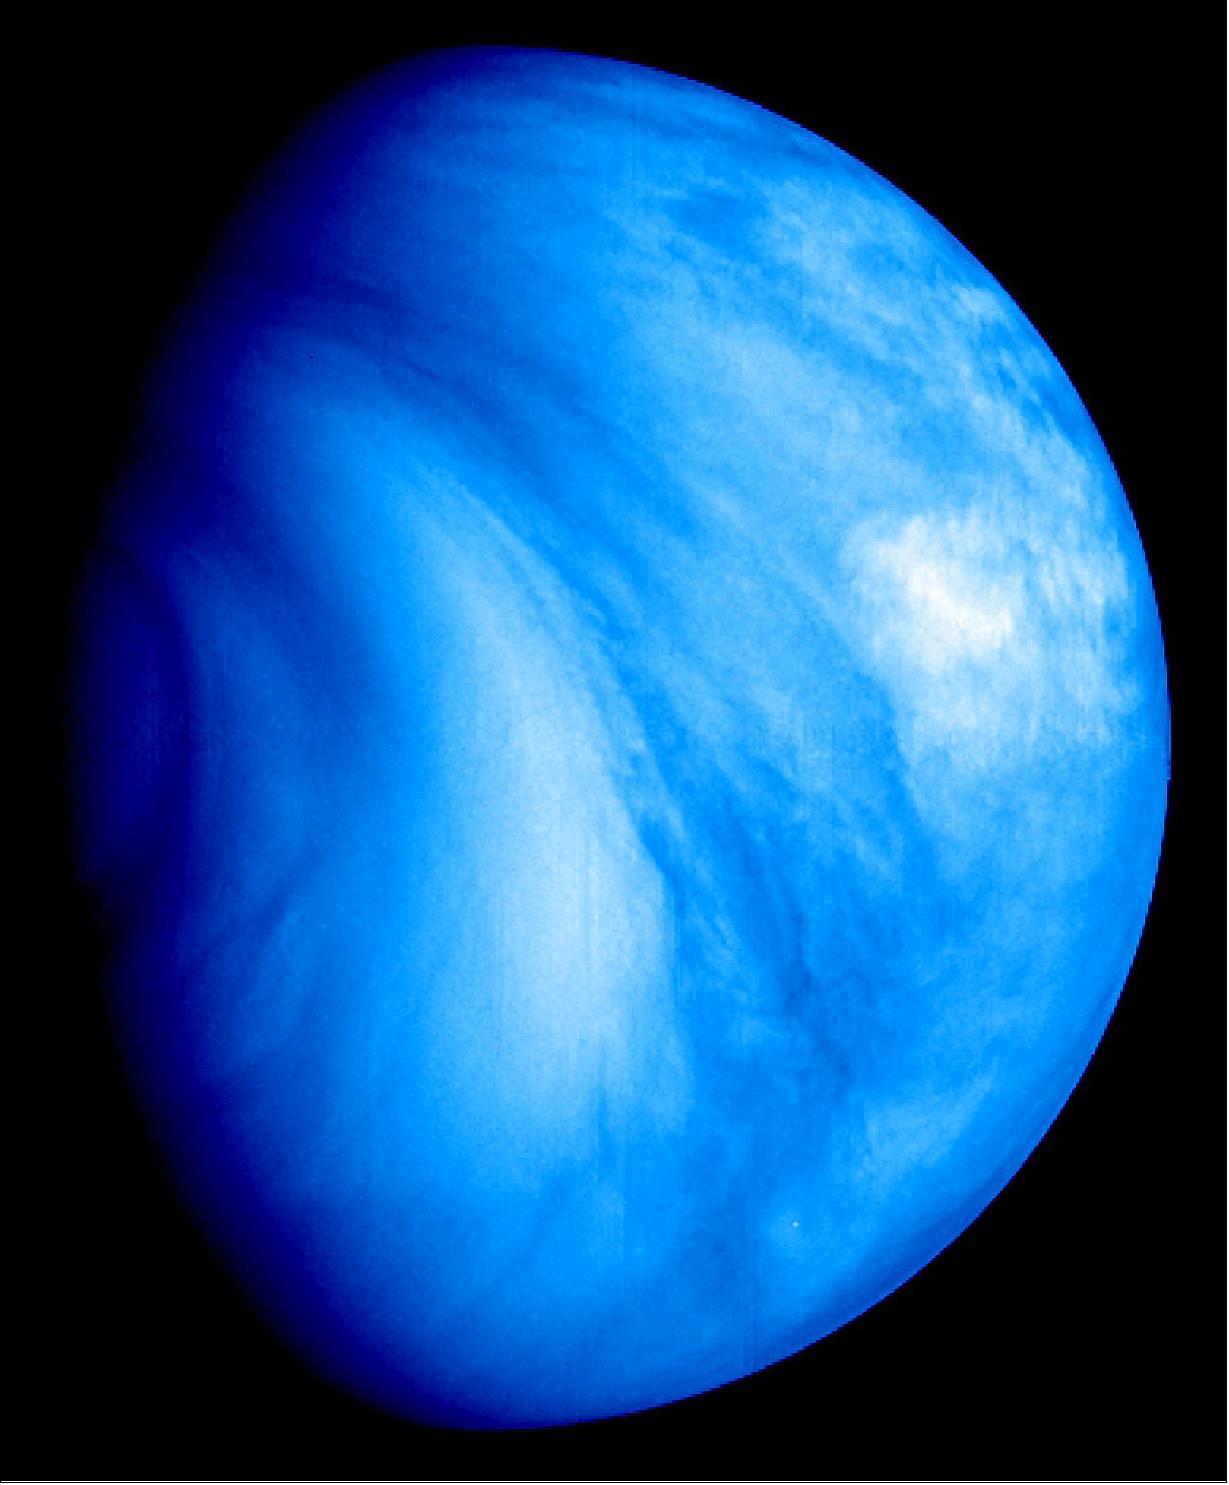 Figure 38: Appearances can be deceiving. This thick, cloud-rich atmosphere rains sulfuric acid and below lie not oceans but a baked and barren lava-strewn surface. Welcome to Venus. The second planet from the Sun is often coined Earth's ‘evil twin' on account of it being almost the same size but instead plagued with a poisonous atmosphere of carbon dioxide and a sweltering 470ºC surface. Its high pressure and temperature is hot enough to melt lead and destroy the spacecraft that dare to land on it. Thanks to its dense atmosphere, it is even hotter than planet Mercury, which orbits closer to the Sun (image credit: ESA/MPS/DLR-PF/IDA) 13)